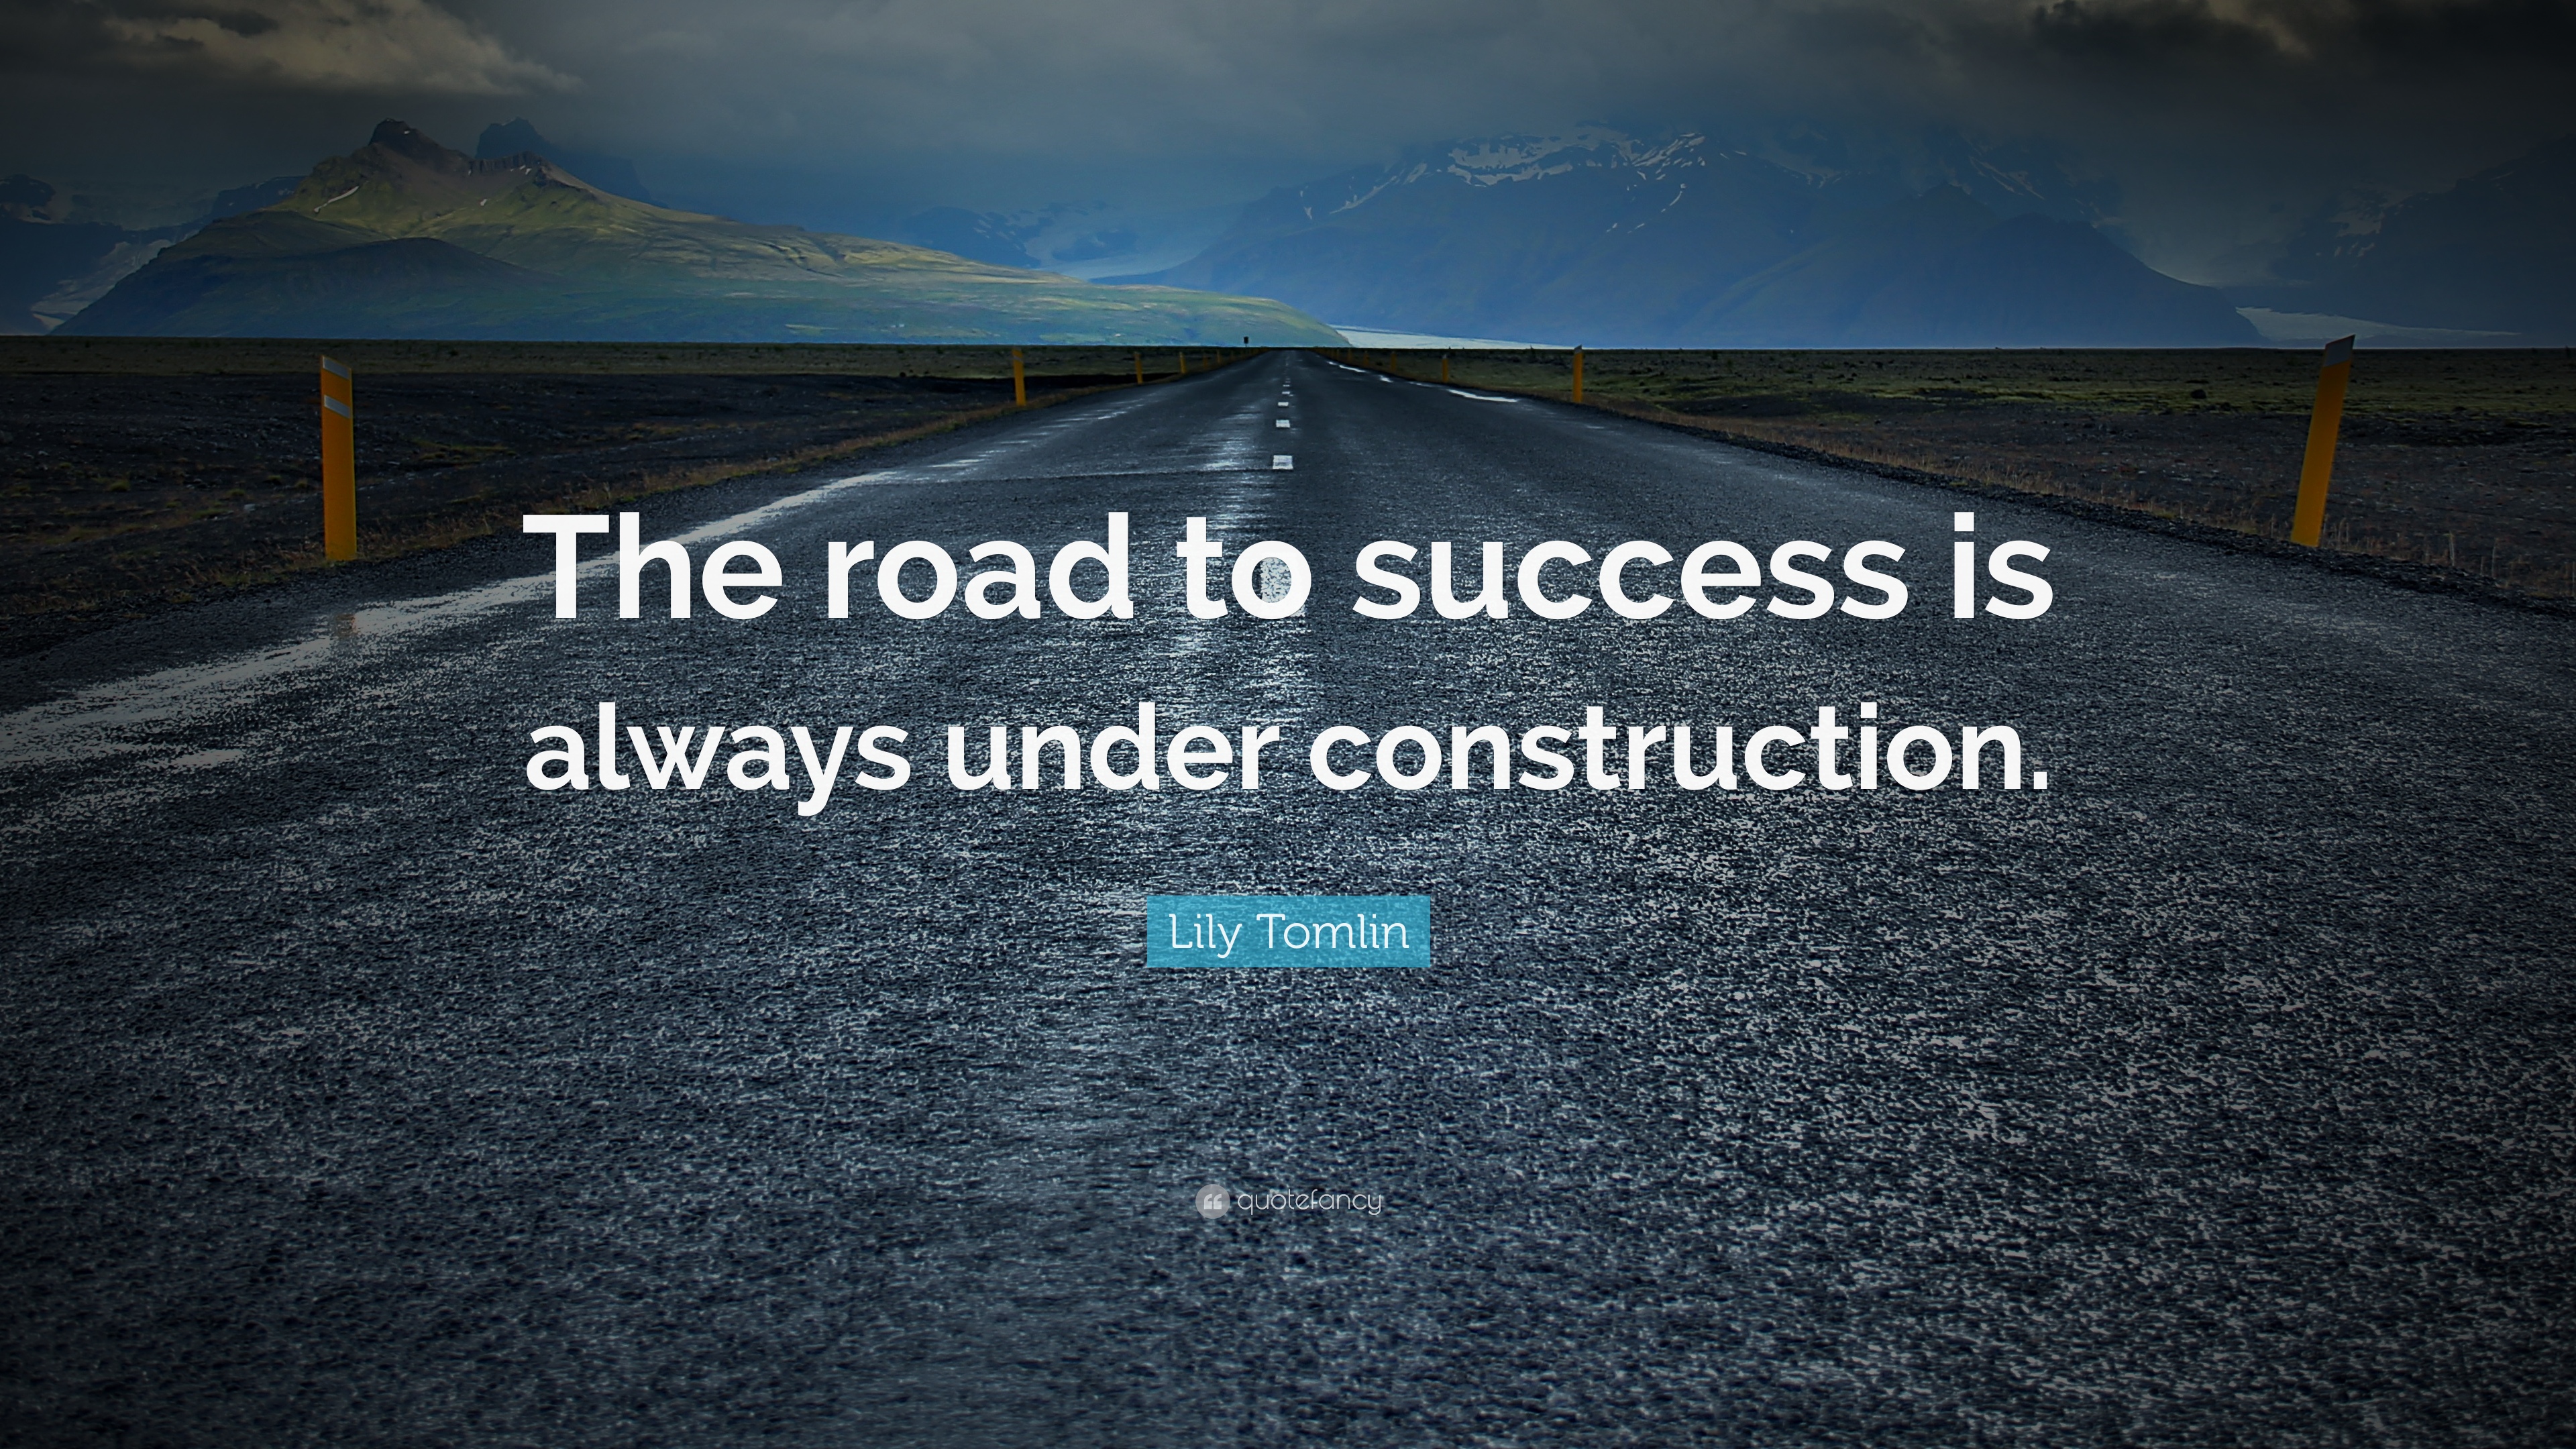 Lily Tomlin Quote: “The road to success is always under construction.”